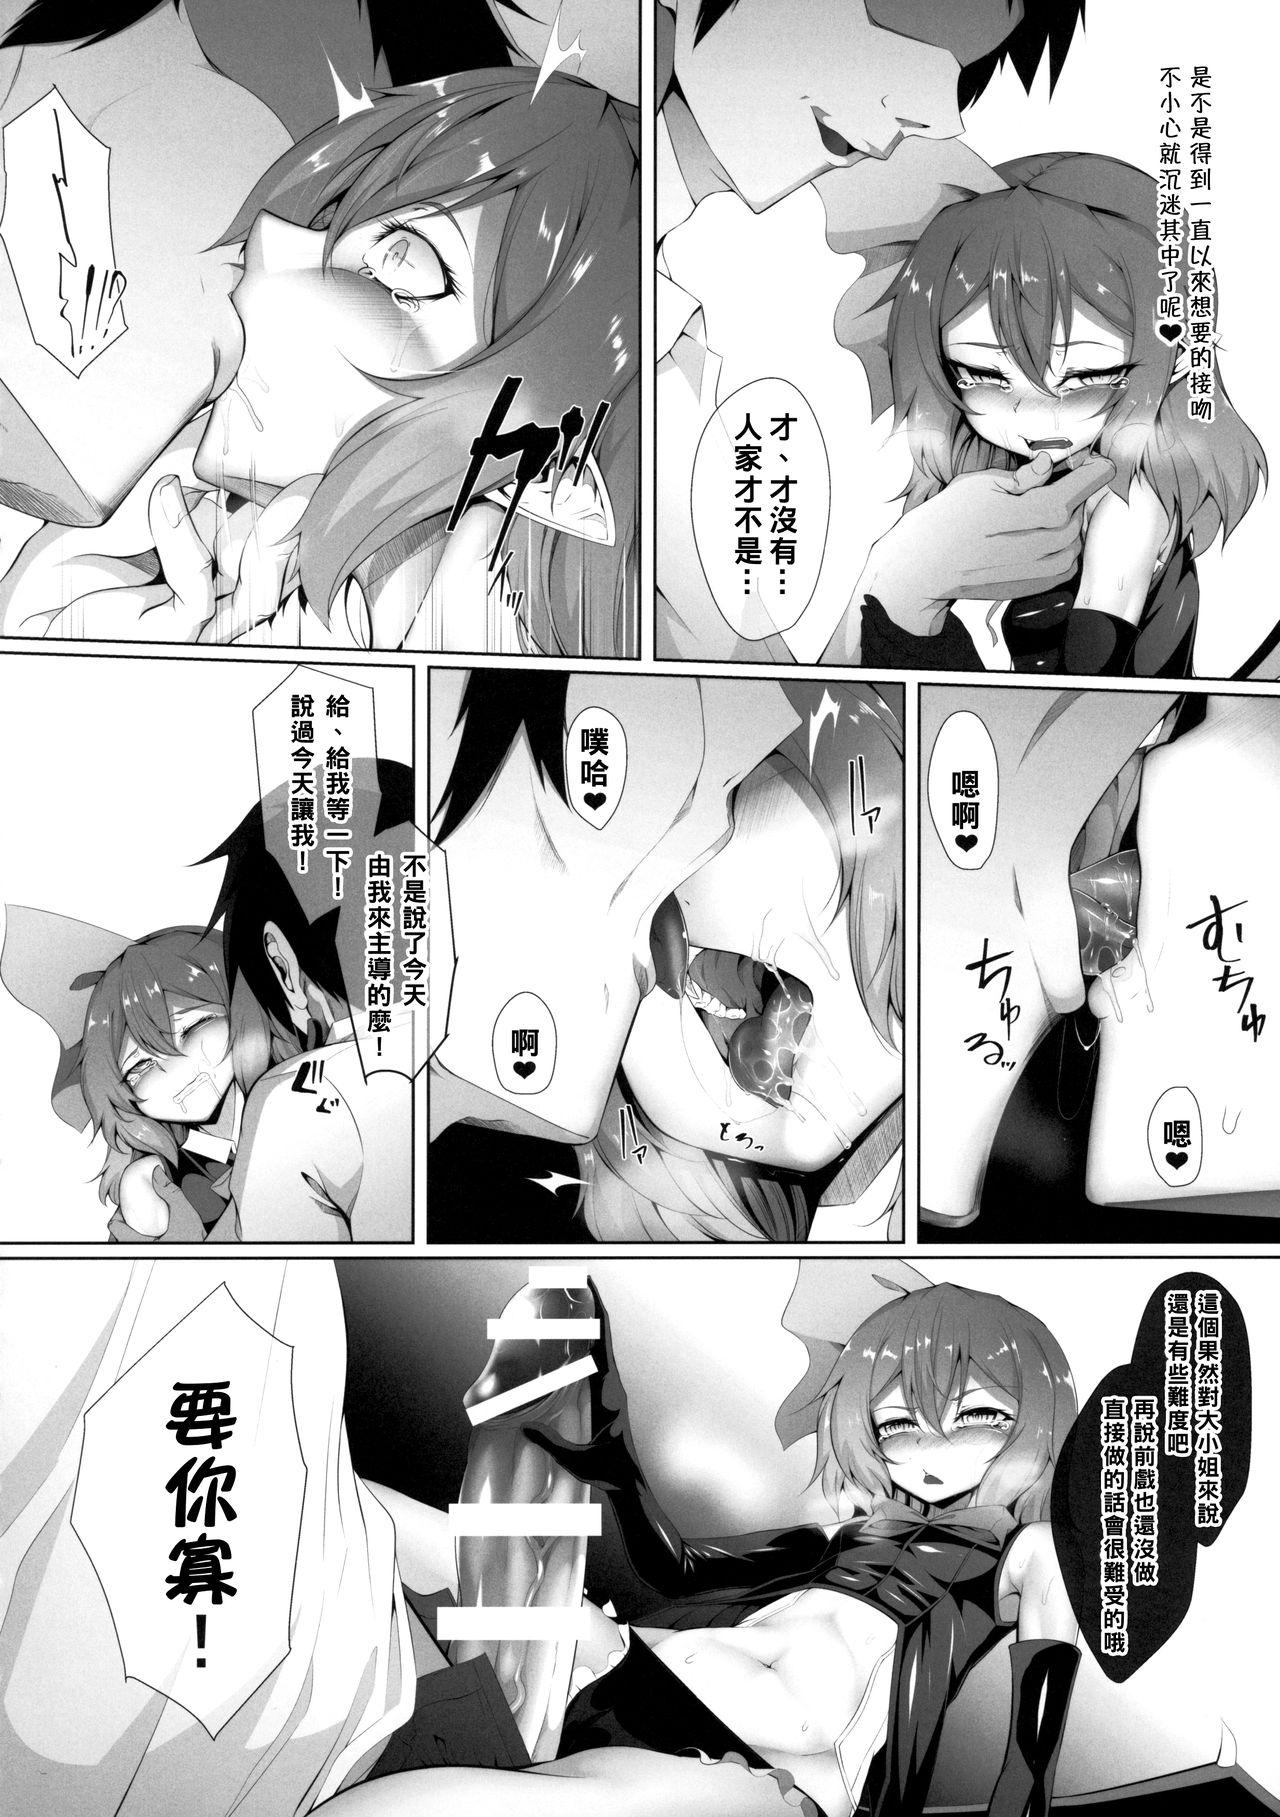 Sharing M.P. vol. 19 - Touhou project Camgirl - Page 7